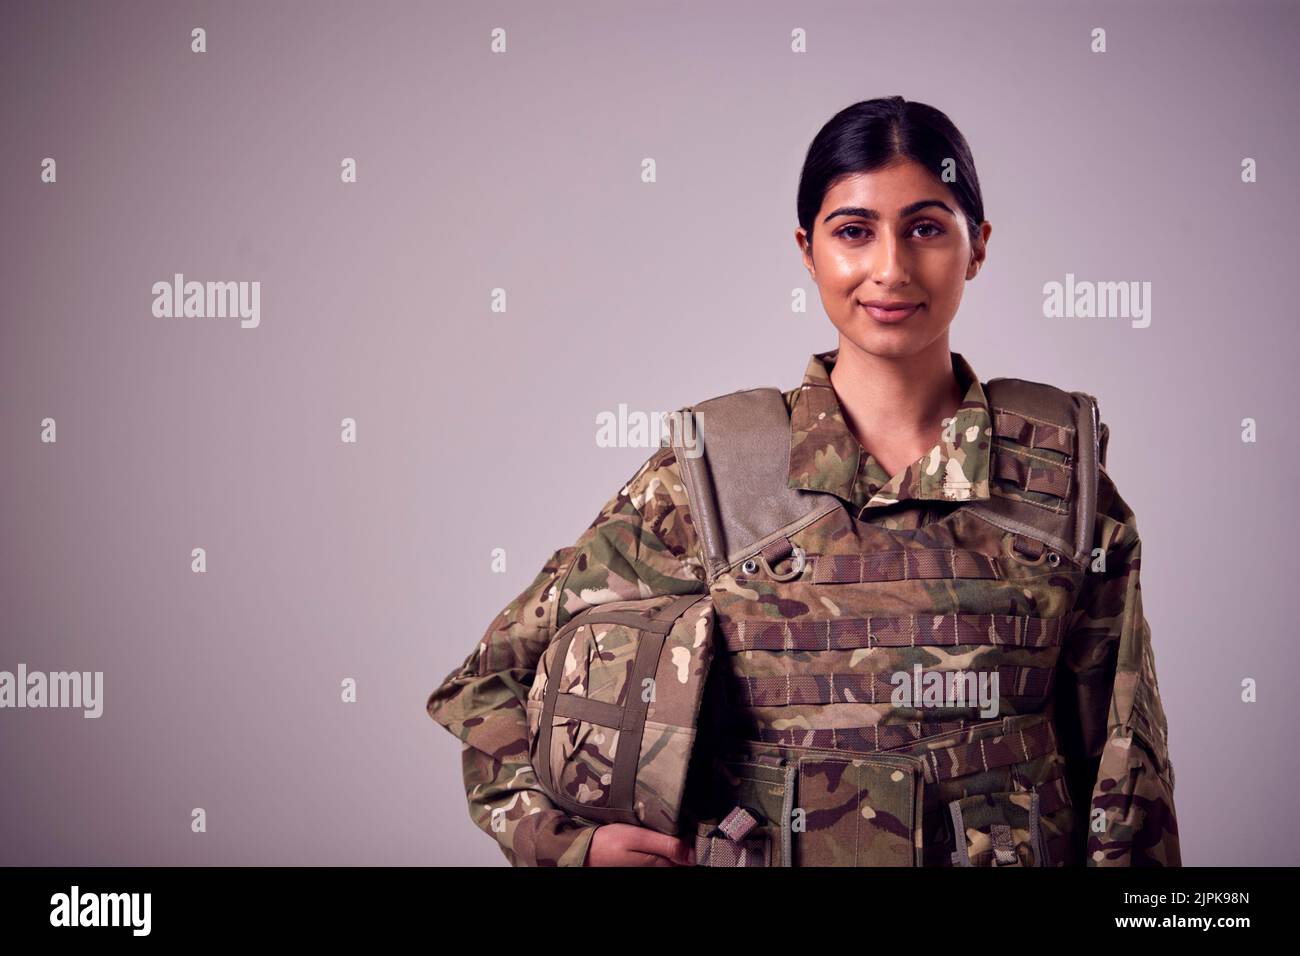 smiling, military, soldier, camouflage clothing, berufsporträt, smile, militaries, troops, soldiers Stock Photo